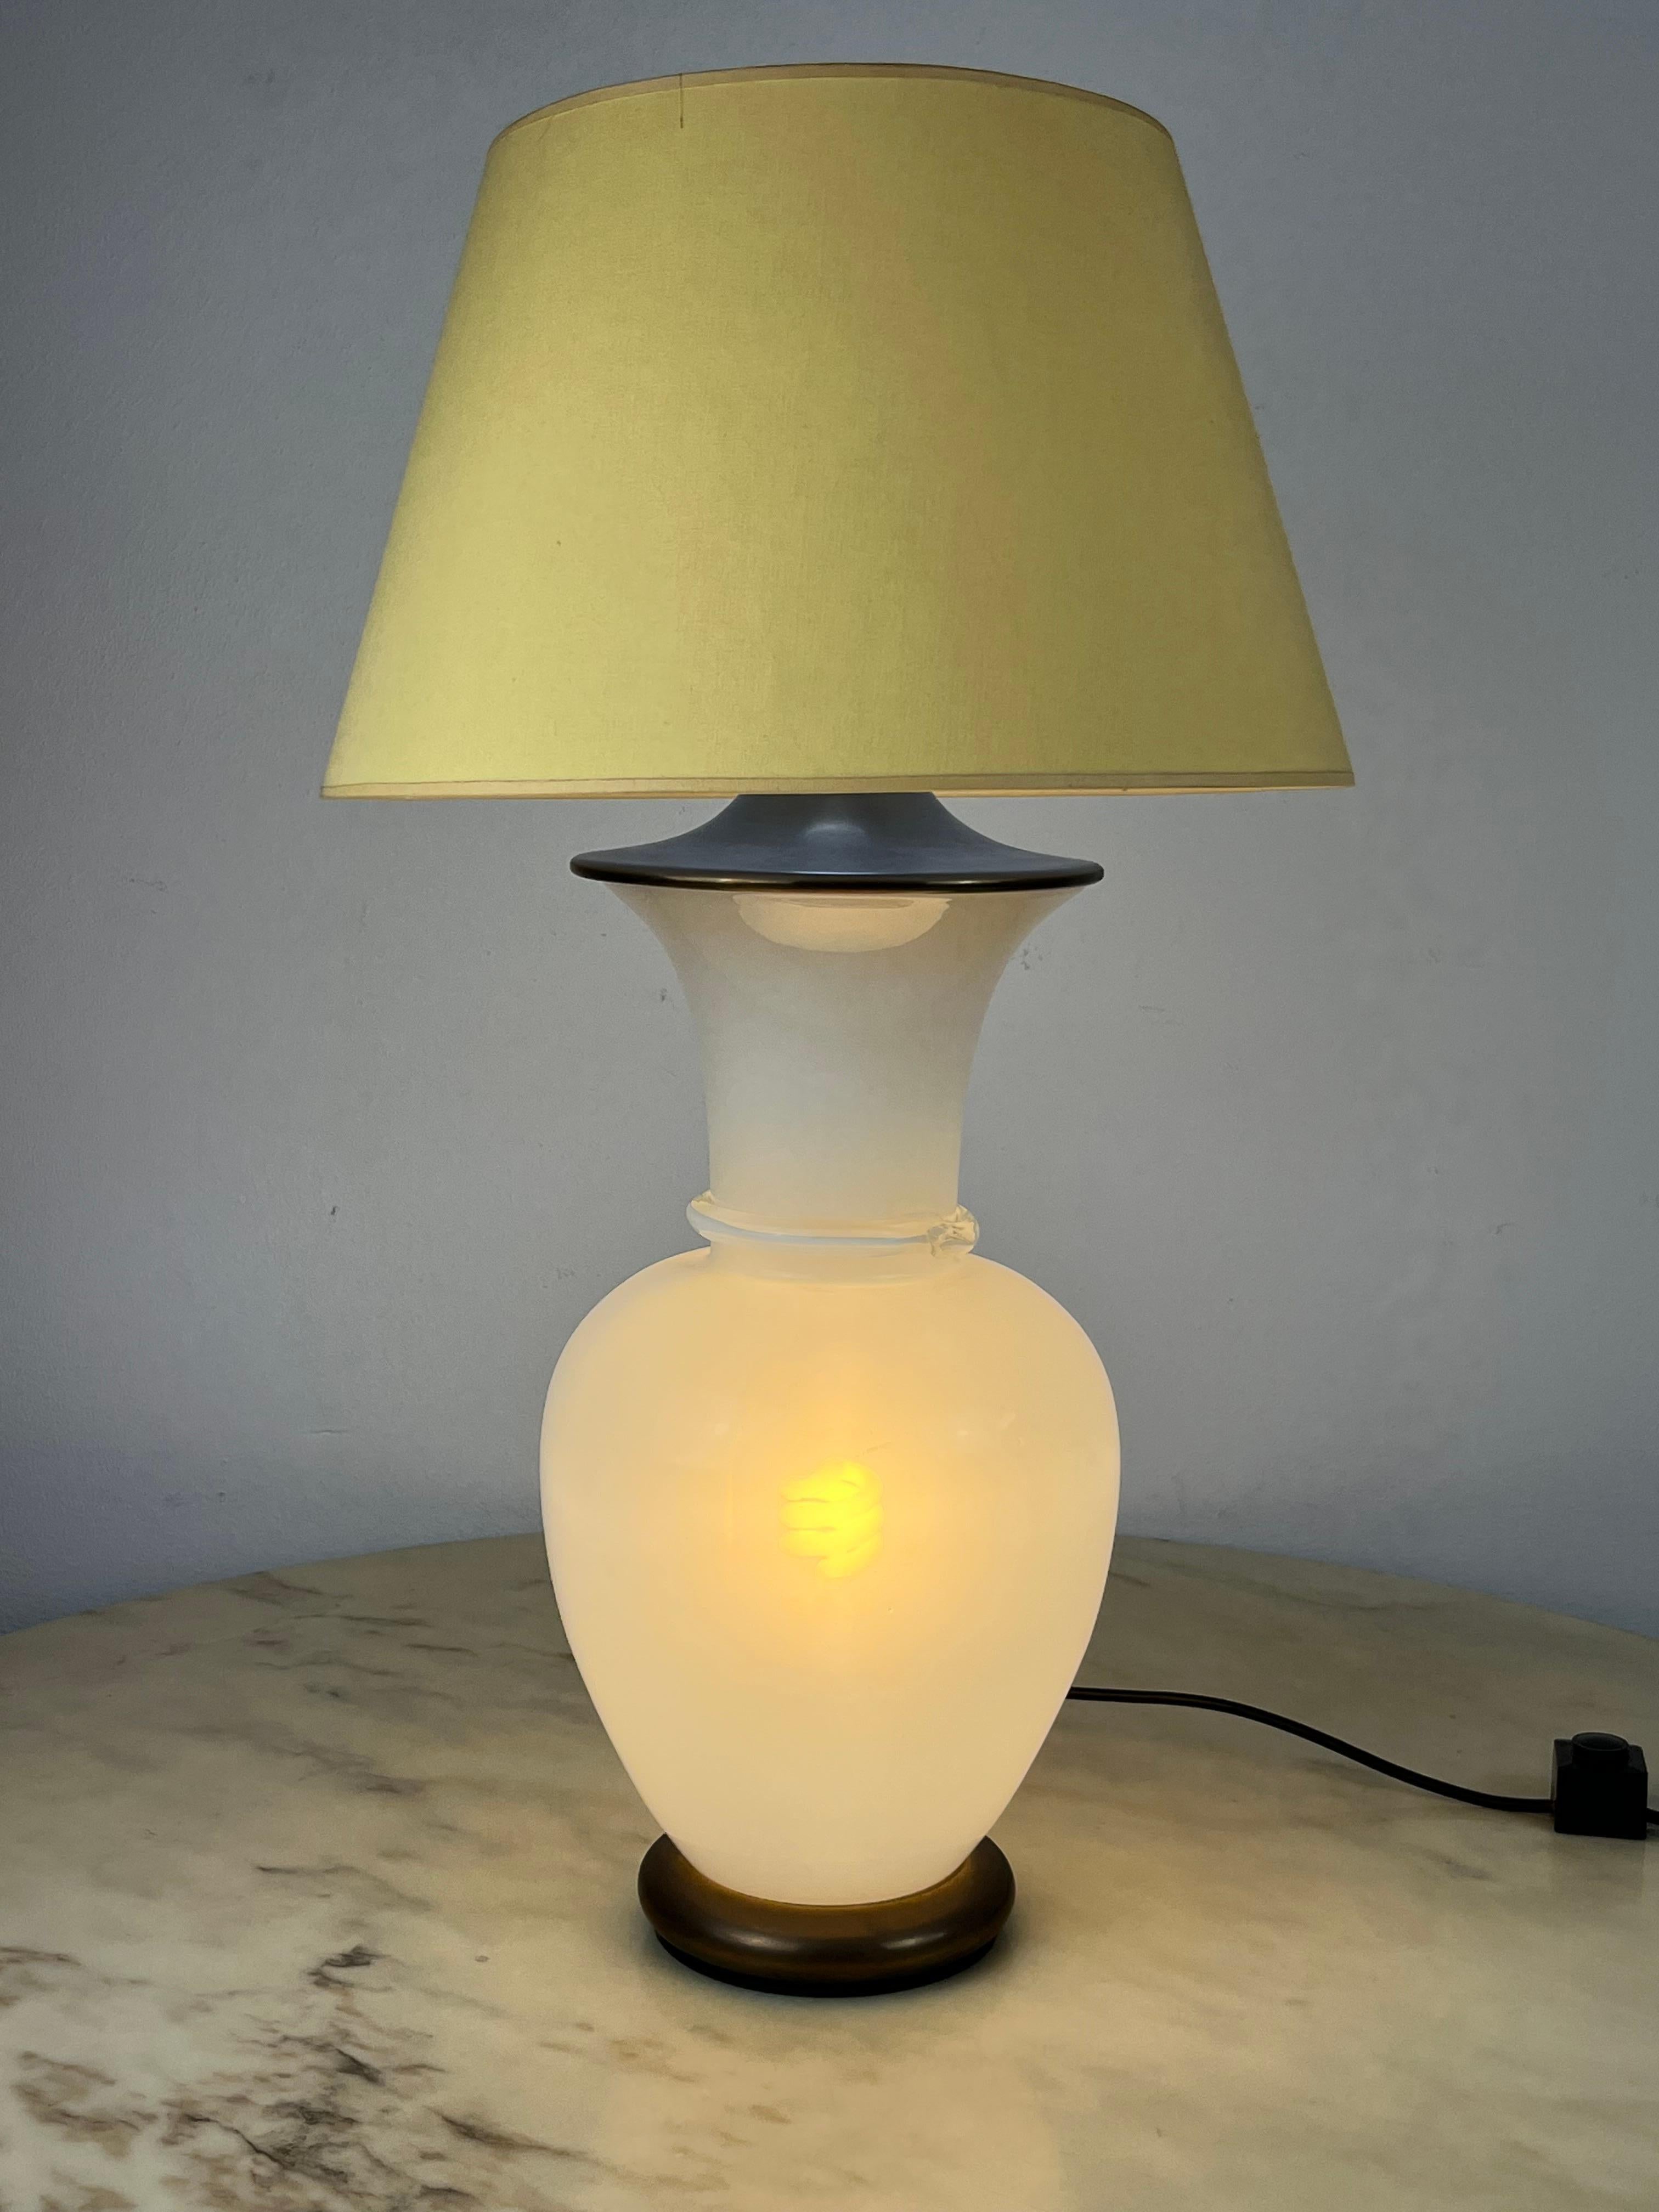 Murano glass and brass table lamp, F. Fabbian, Italy, 1970s
Found in a noble apartment.
Very beautiful and particular because it has a double ignition. It has a lamp inside the pot-bellied part and one in the lampshade housing. High 72 cm; Diameter